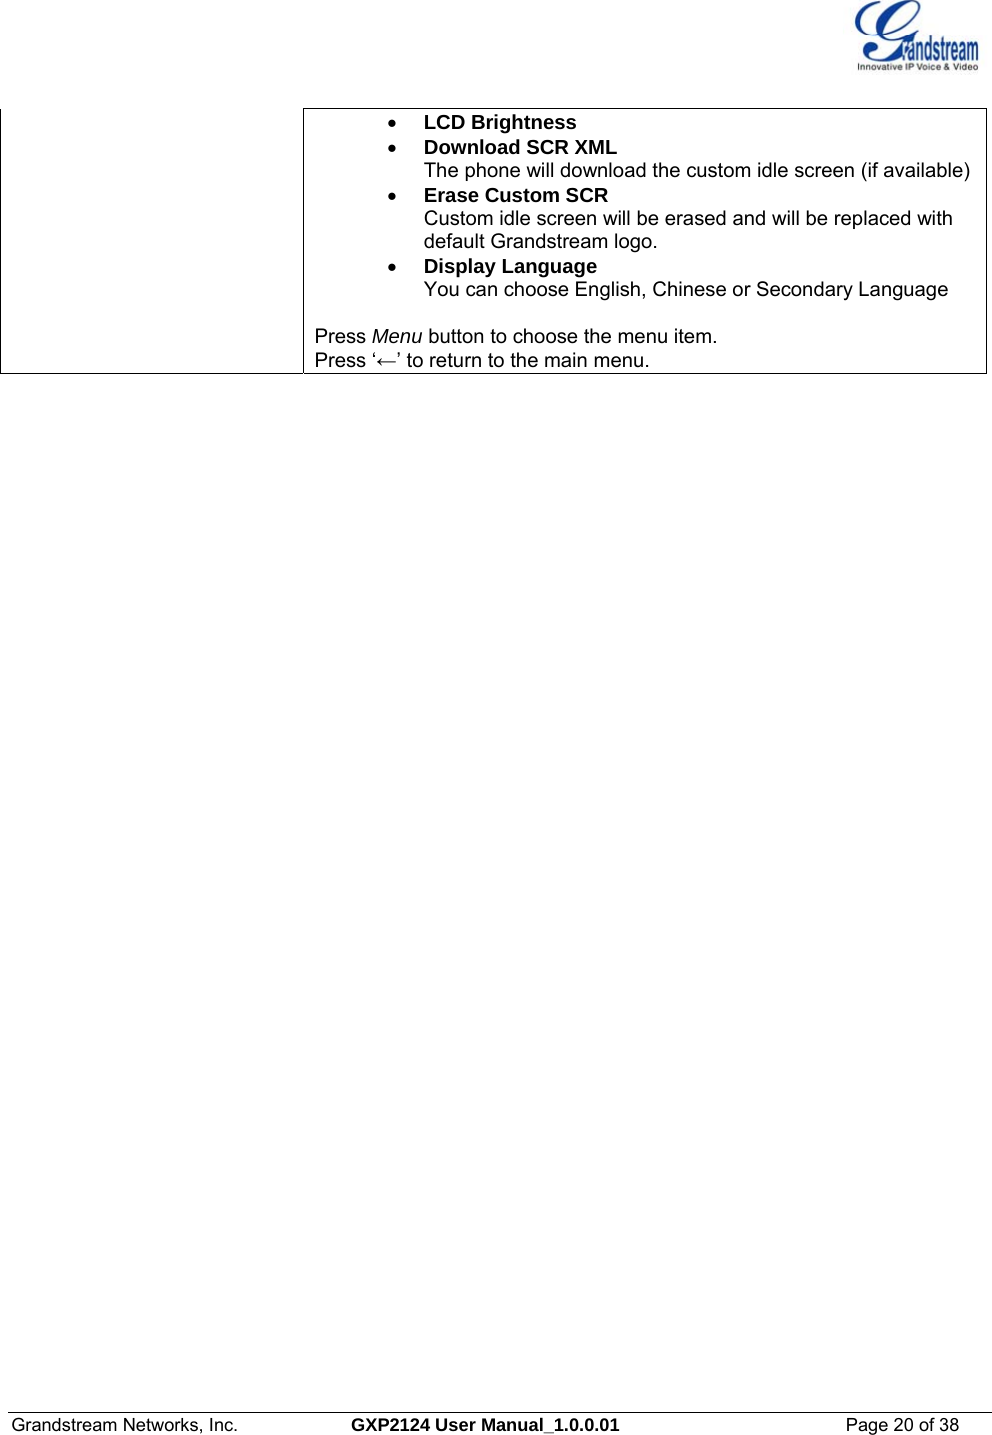  Grandstream Networks, Inc.  GXP2124 User Manual_1.0.0.01  Page 20 of 38                                                                                                                      • LCD Brightness • Download SCR XML The phone will download the custom idle screen (if available)• Erase Custom SCR Custom idle screen will be erased and will be replaced with default Grandstream logo. • Display Language You can choose English, Chinese or Secondary Language   Press Menu button to choose the menu item.  Press ‘←’ to return to the main menu. 